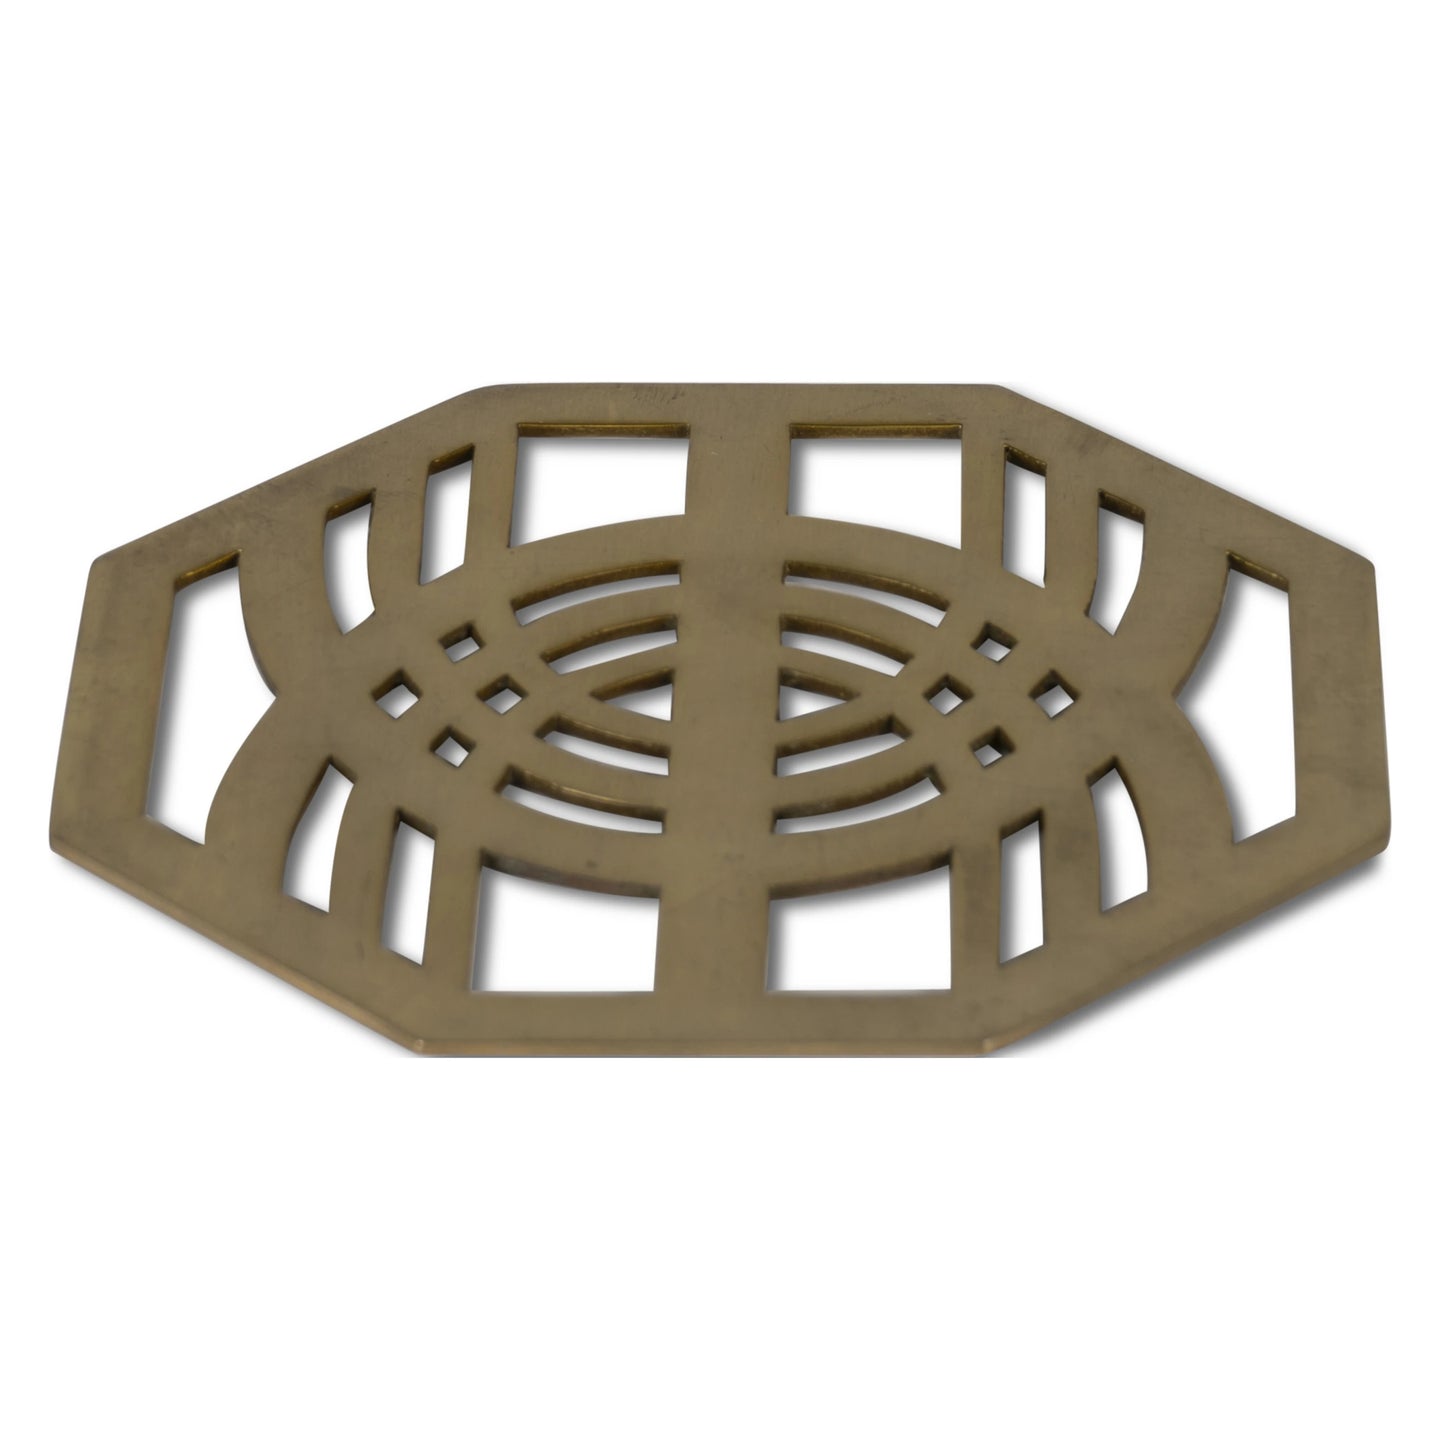 Authentic Models Steel Coasters, Gold - Set Of 3 - BA012